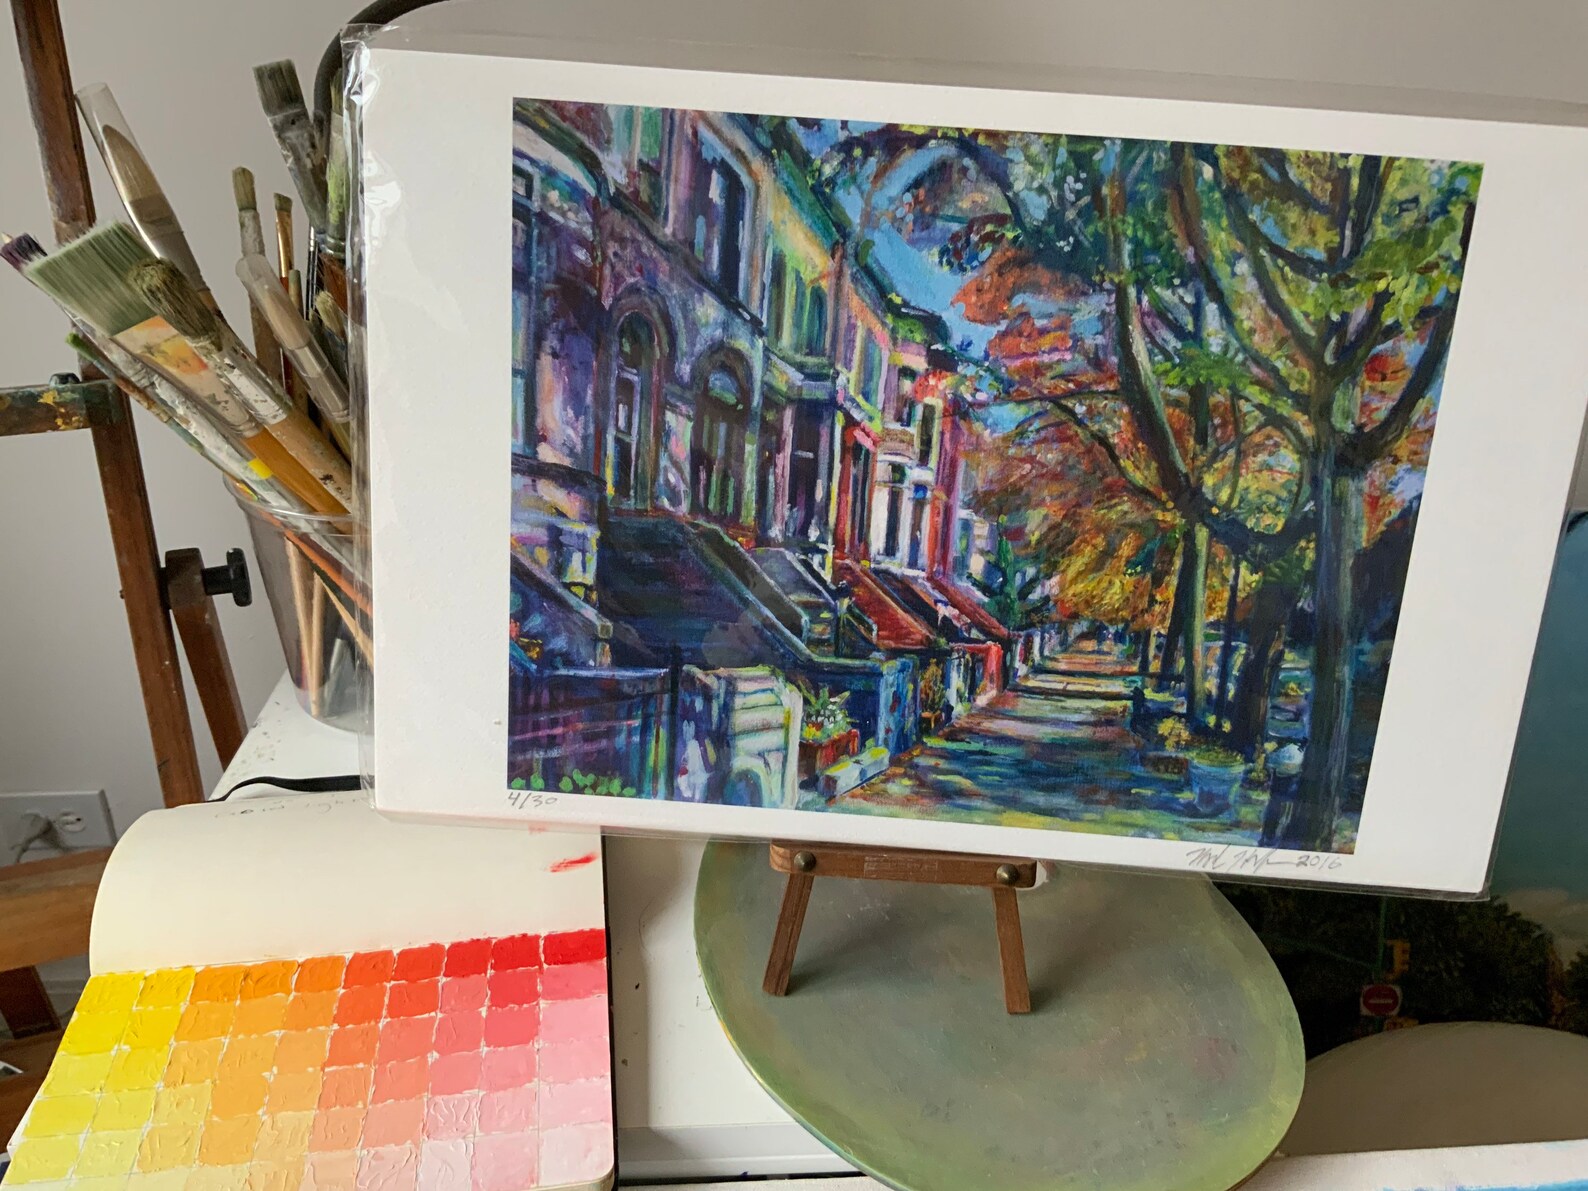 "11"x17" Midwood Street Brownstones giclee print on artist's table with color research study notebook